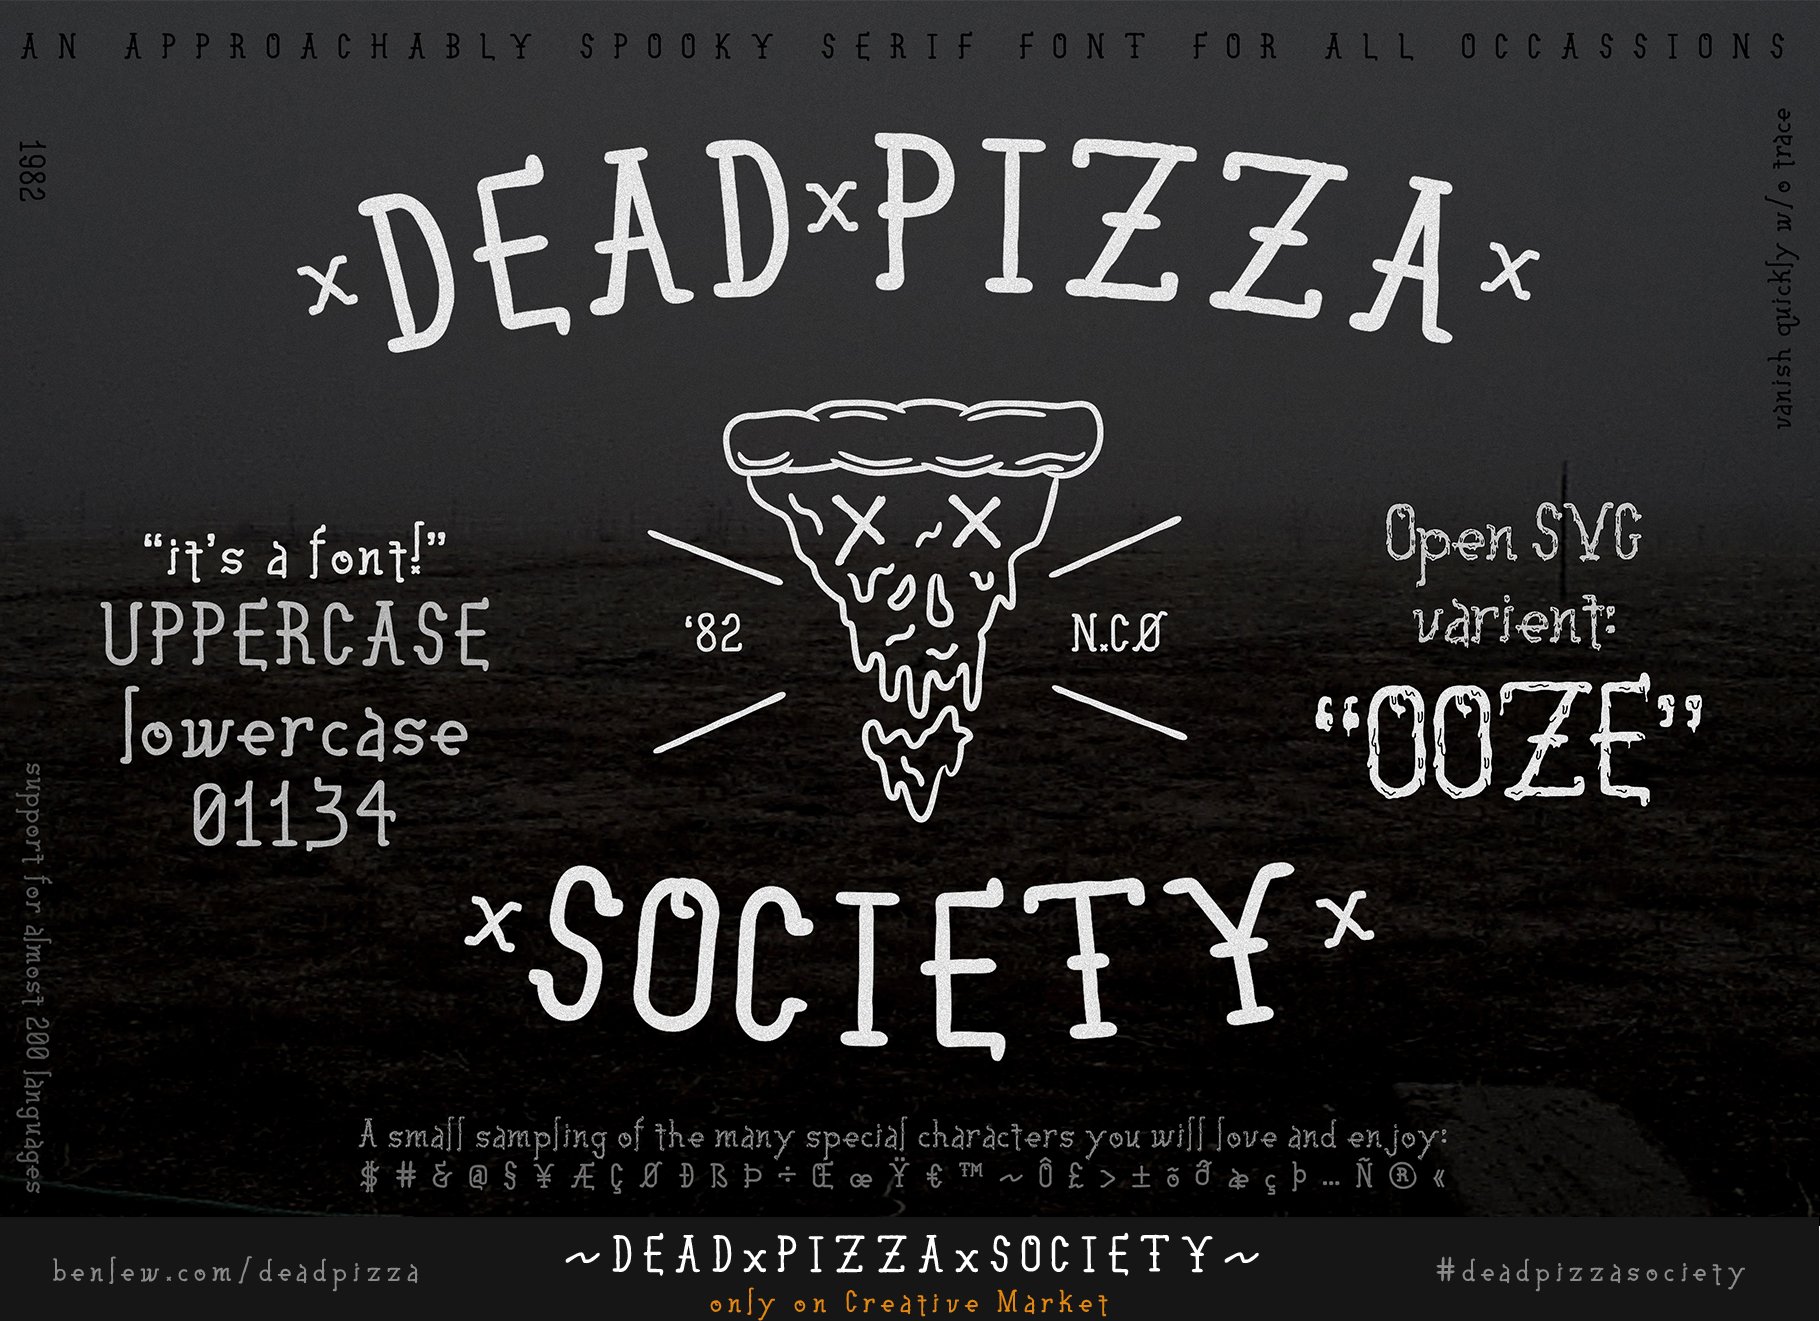 Dead Pizza Society cover image.